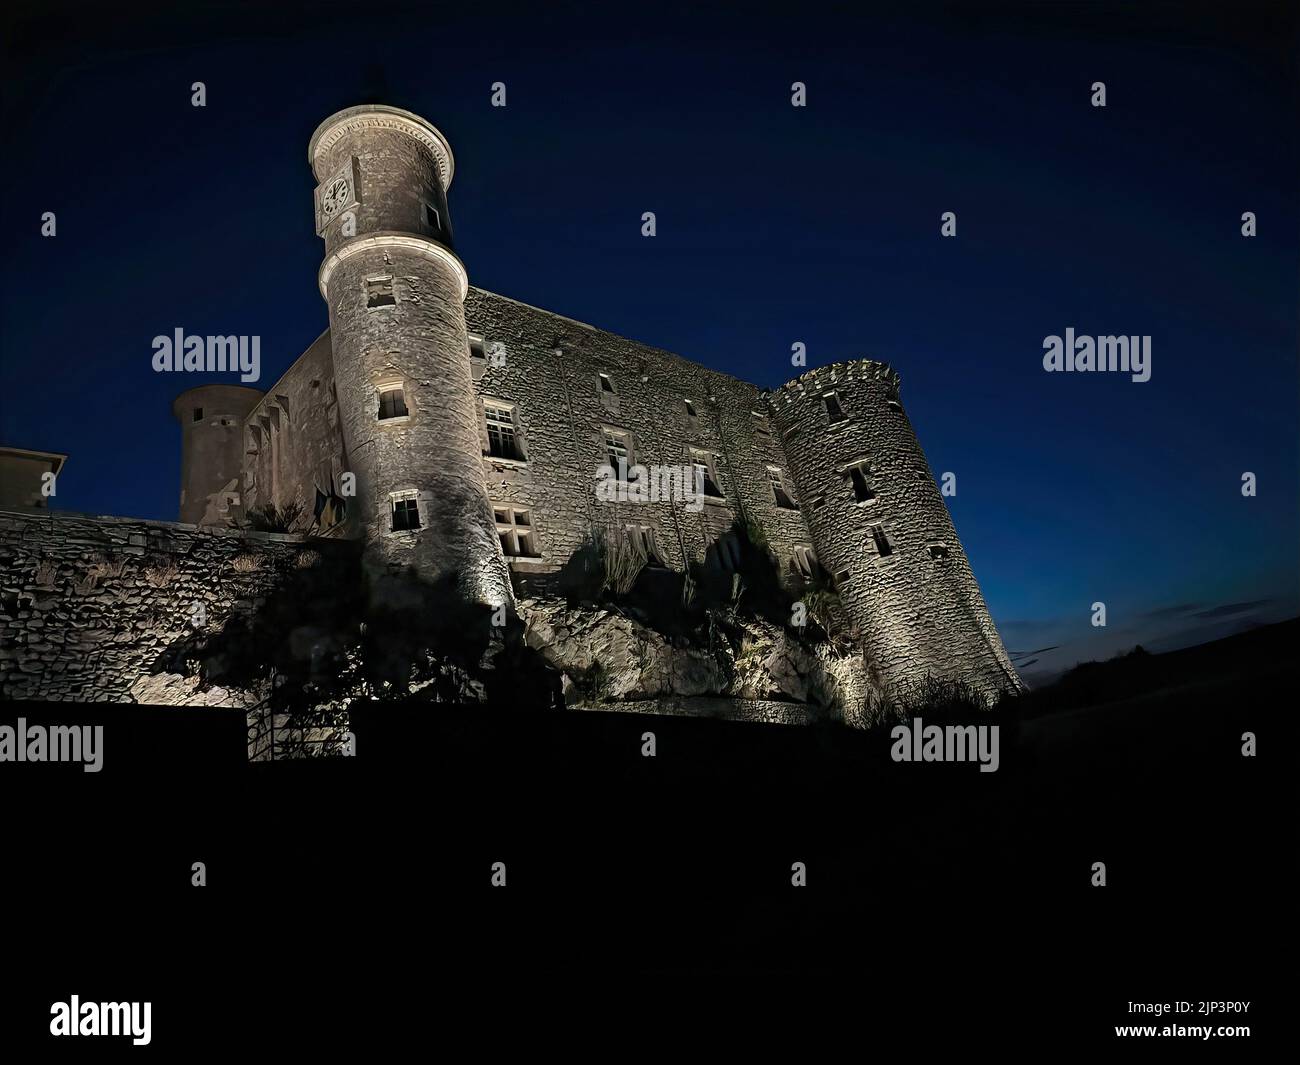 Night landscape photography on the old illuminated majestic castle at Lussan, Gard, France against a dark sky Stock Photo